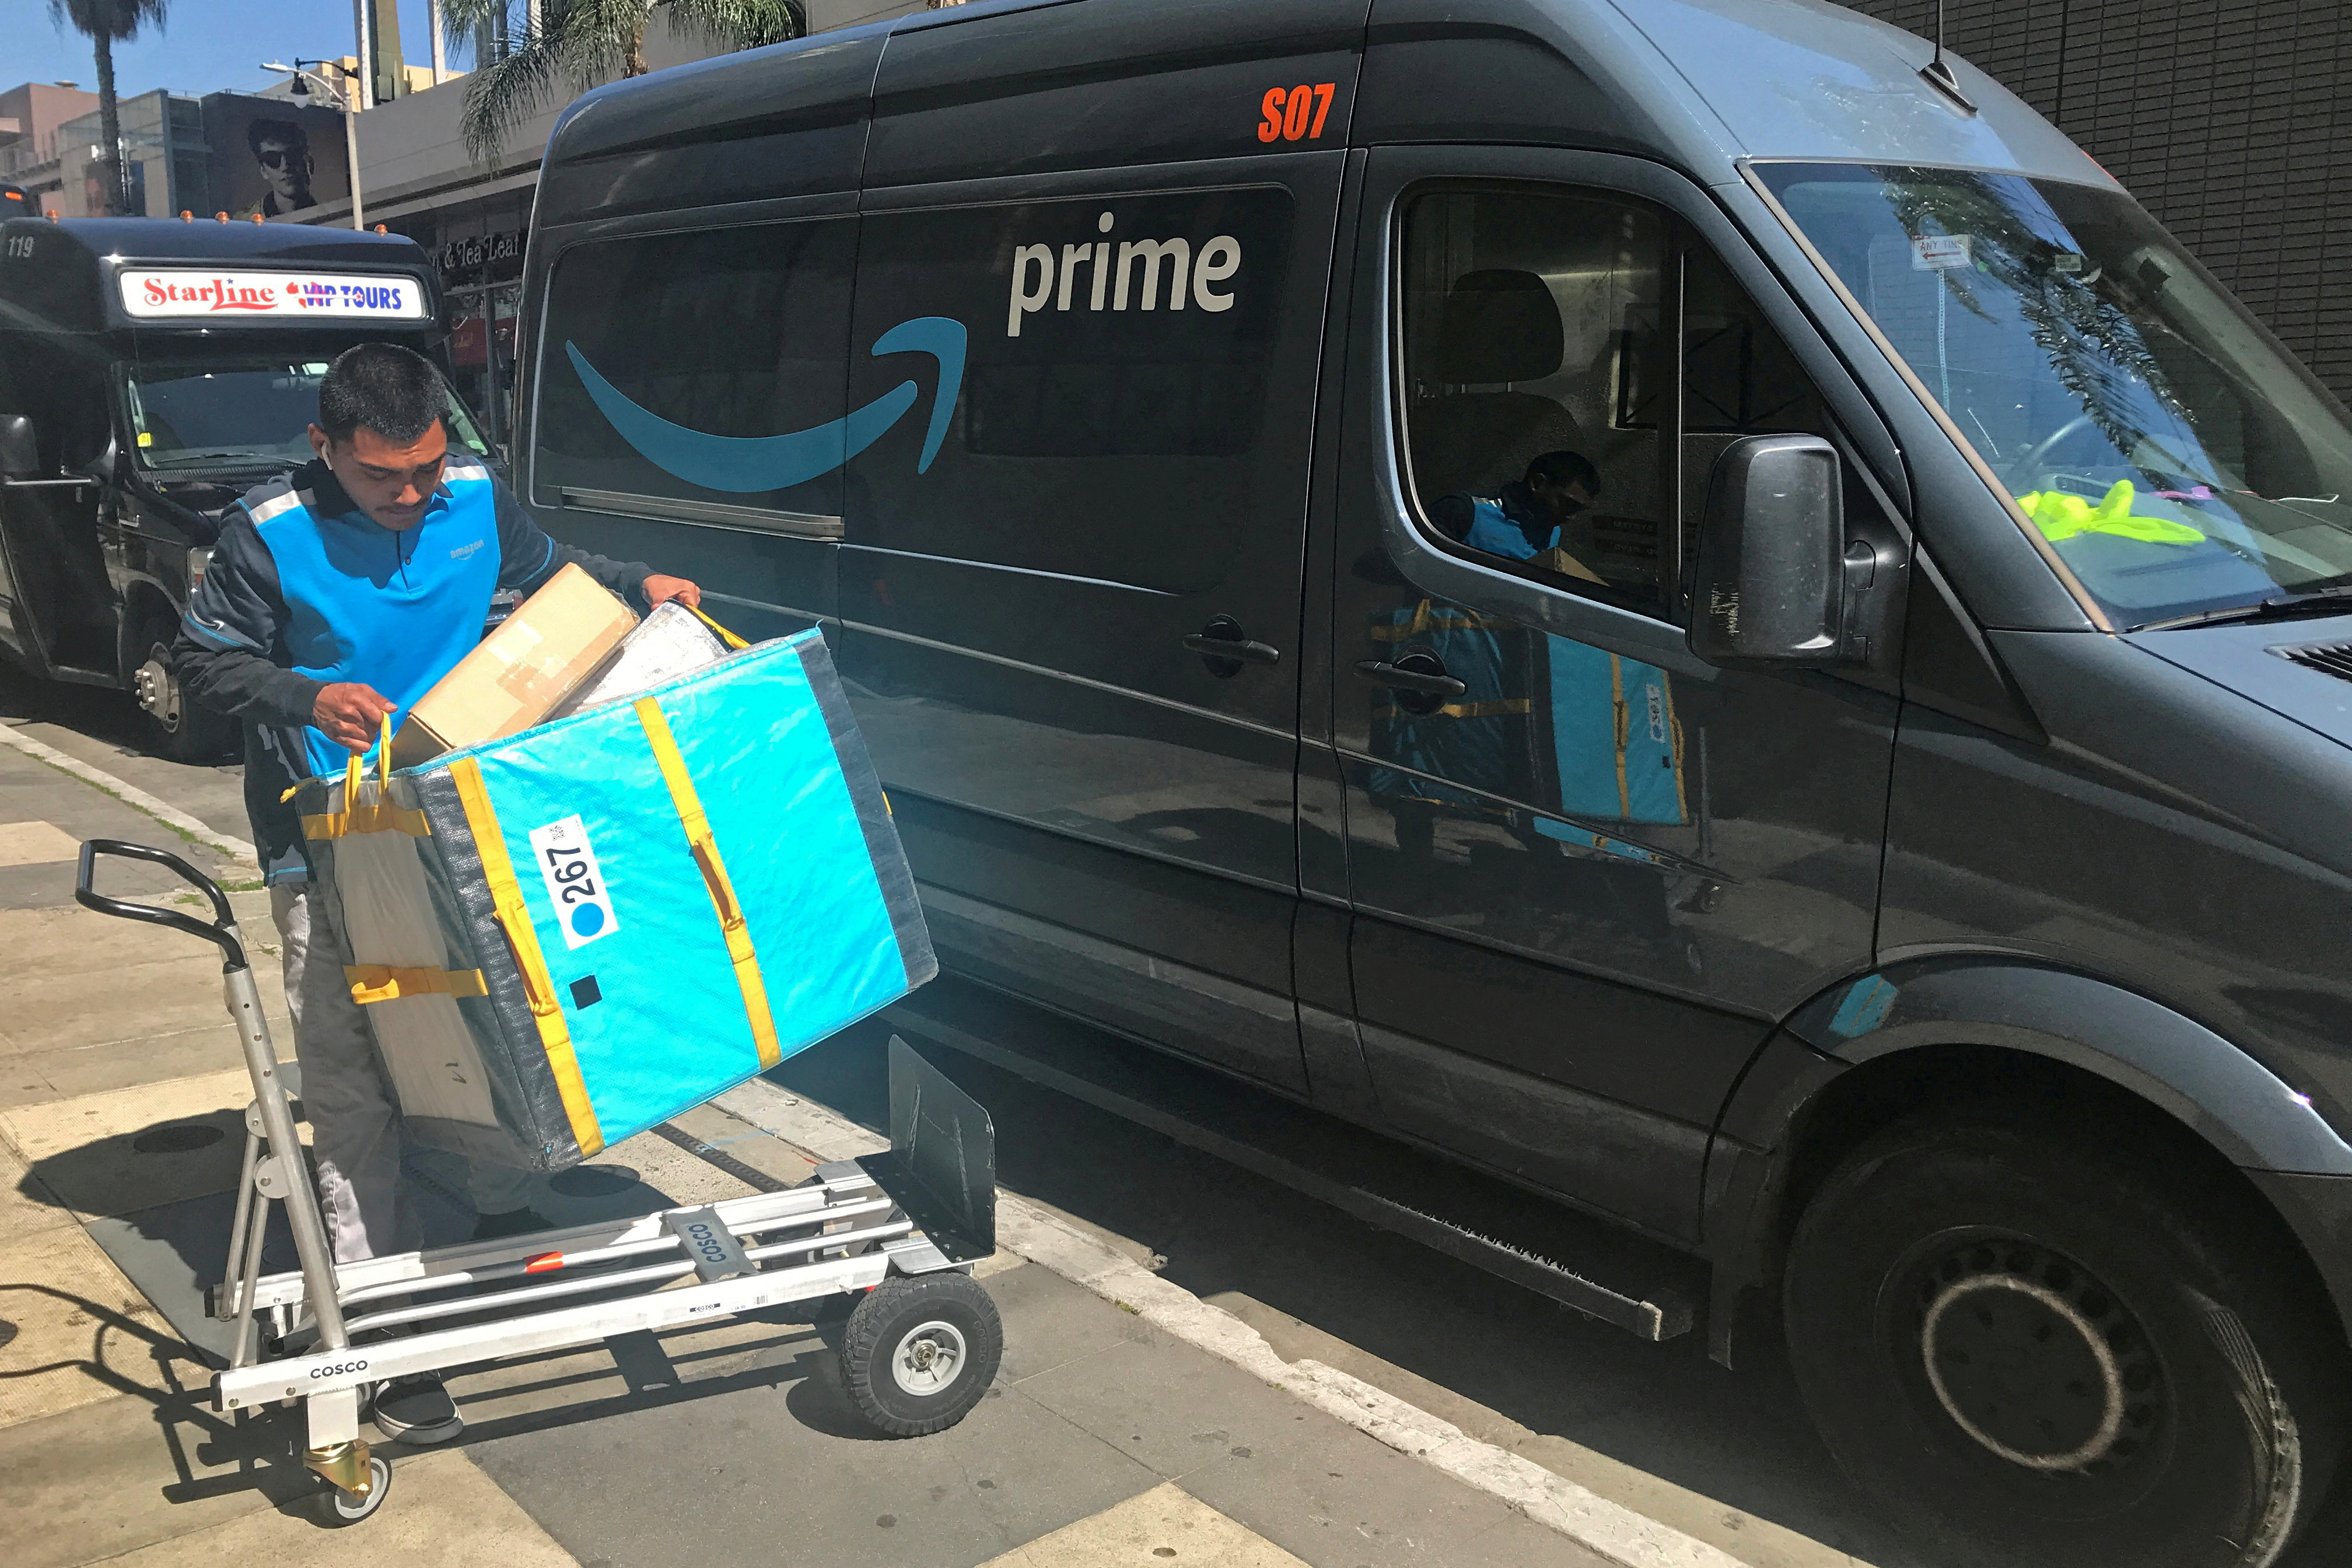 An Amazon delivery worker loads a trolley from a Prime van in Los Angeles